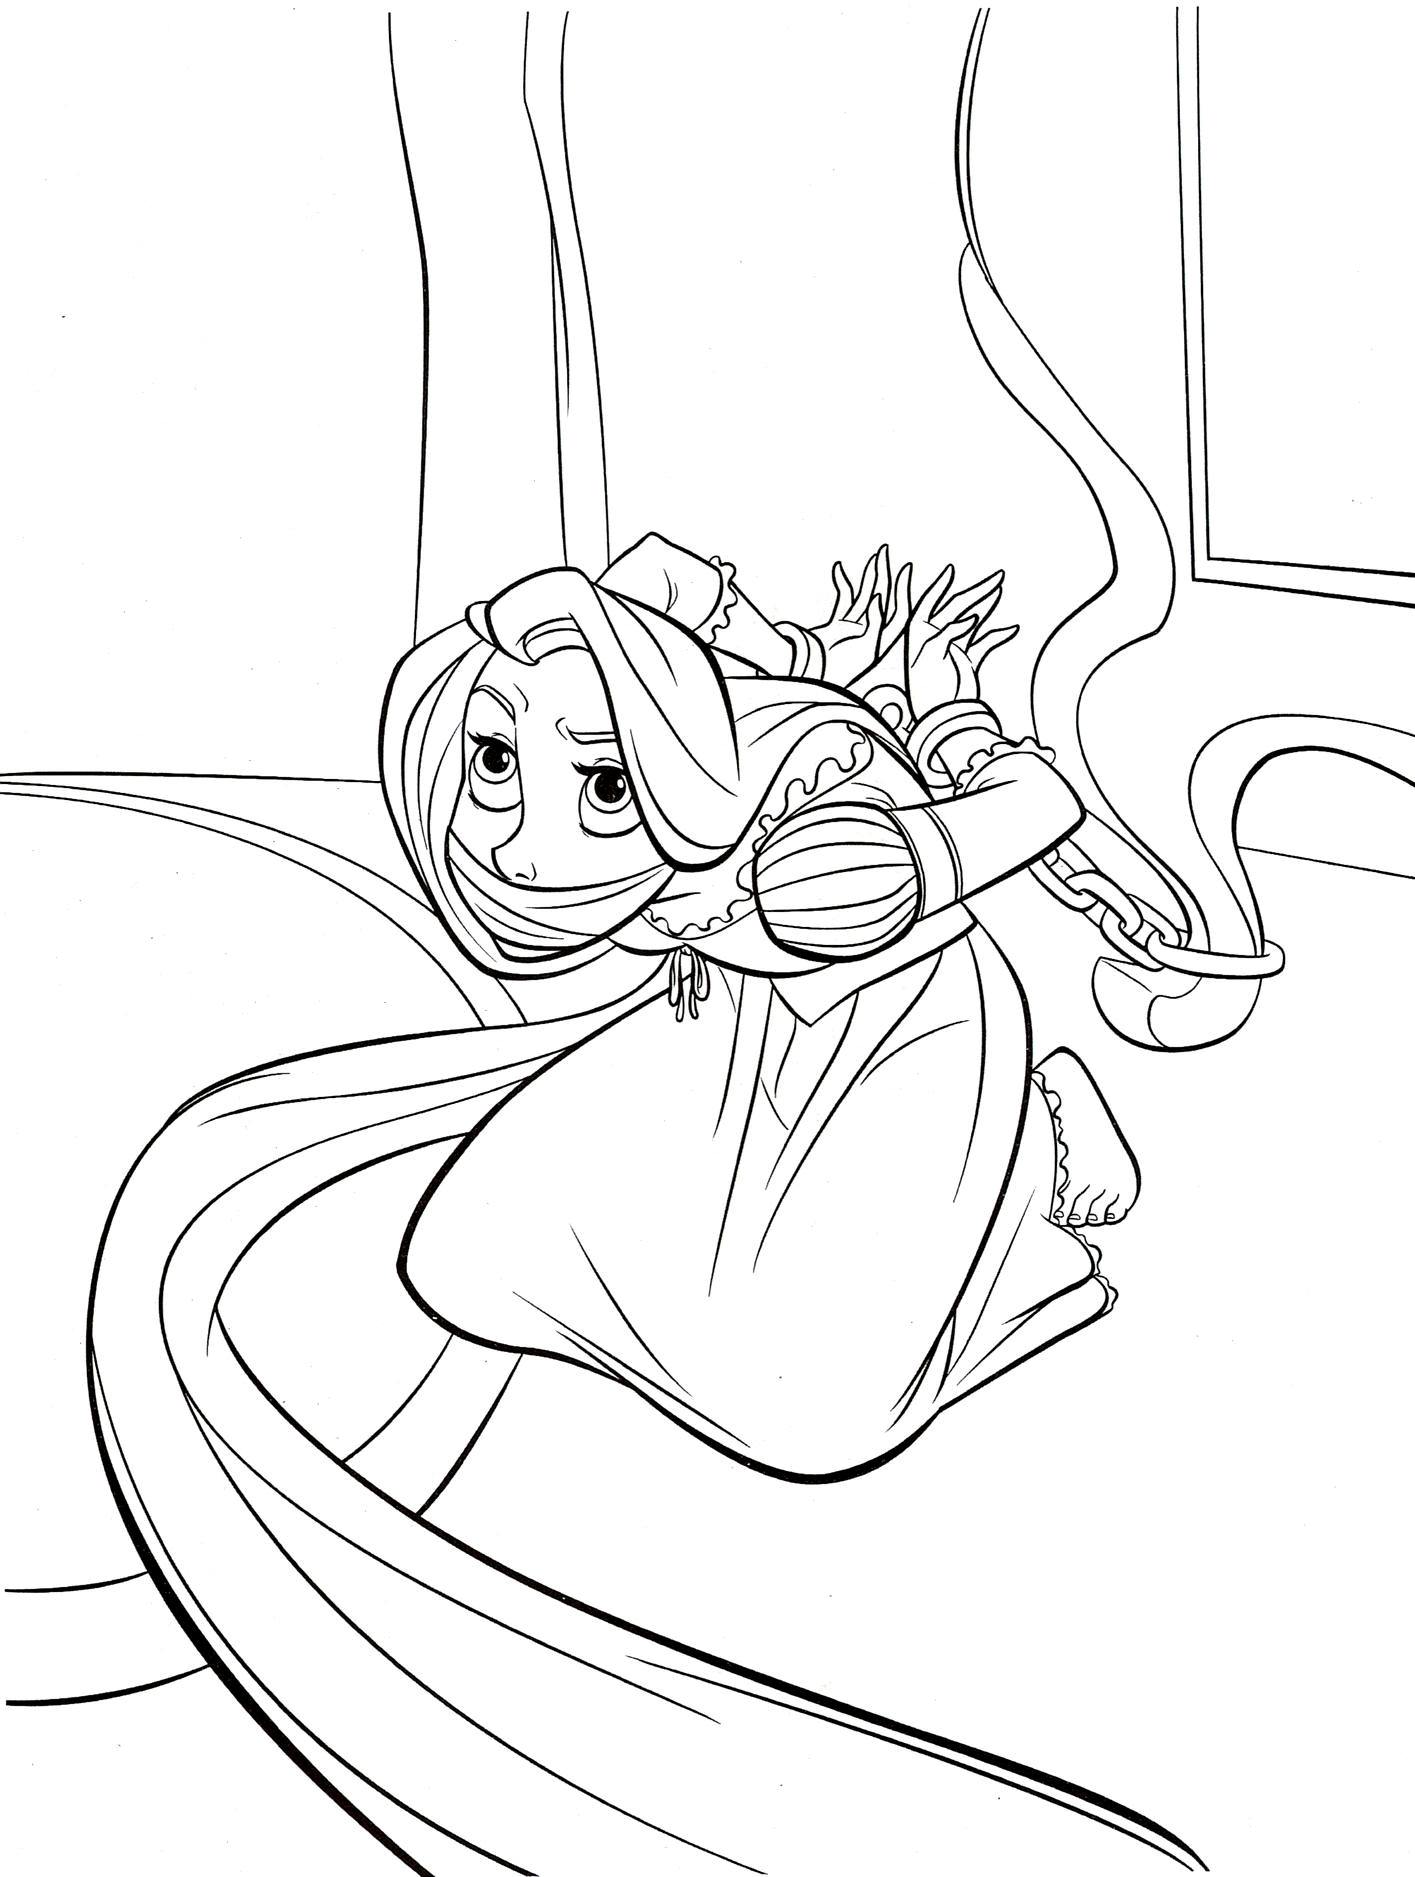 Mother Gothel Coloring Pages at GetDrawings | Free download